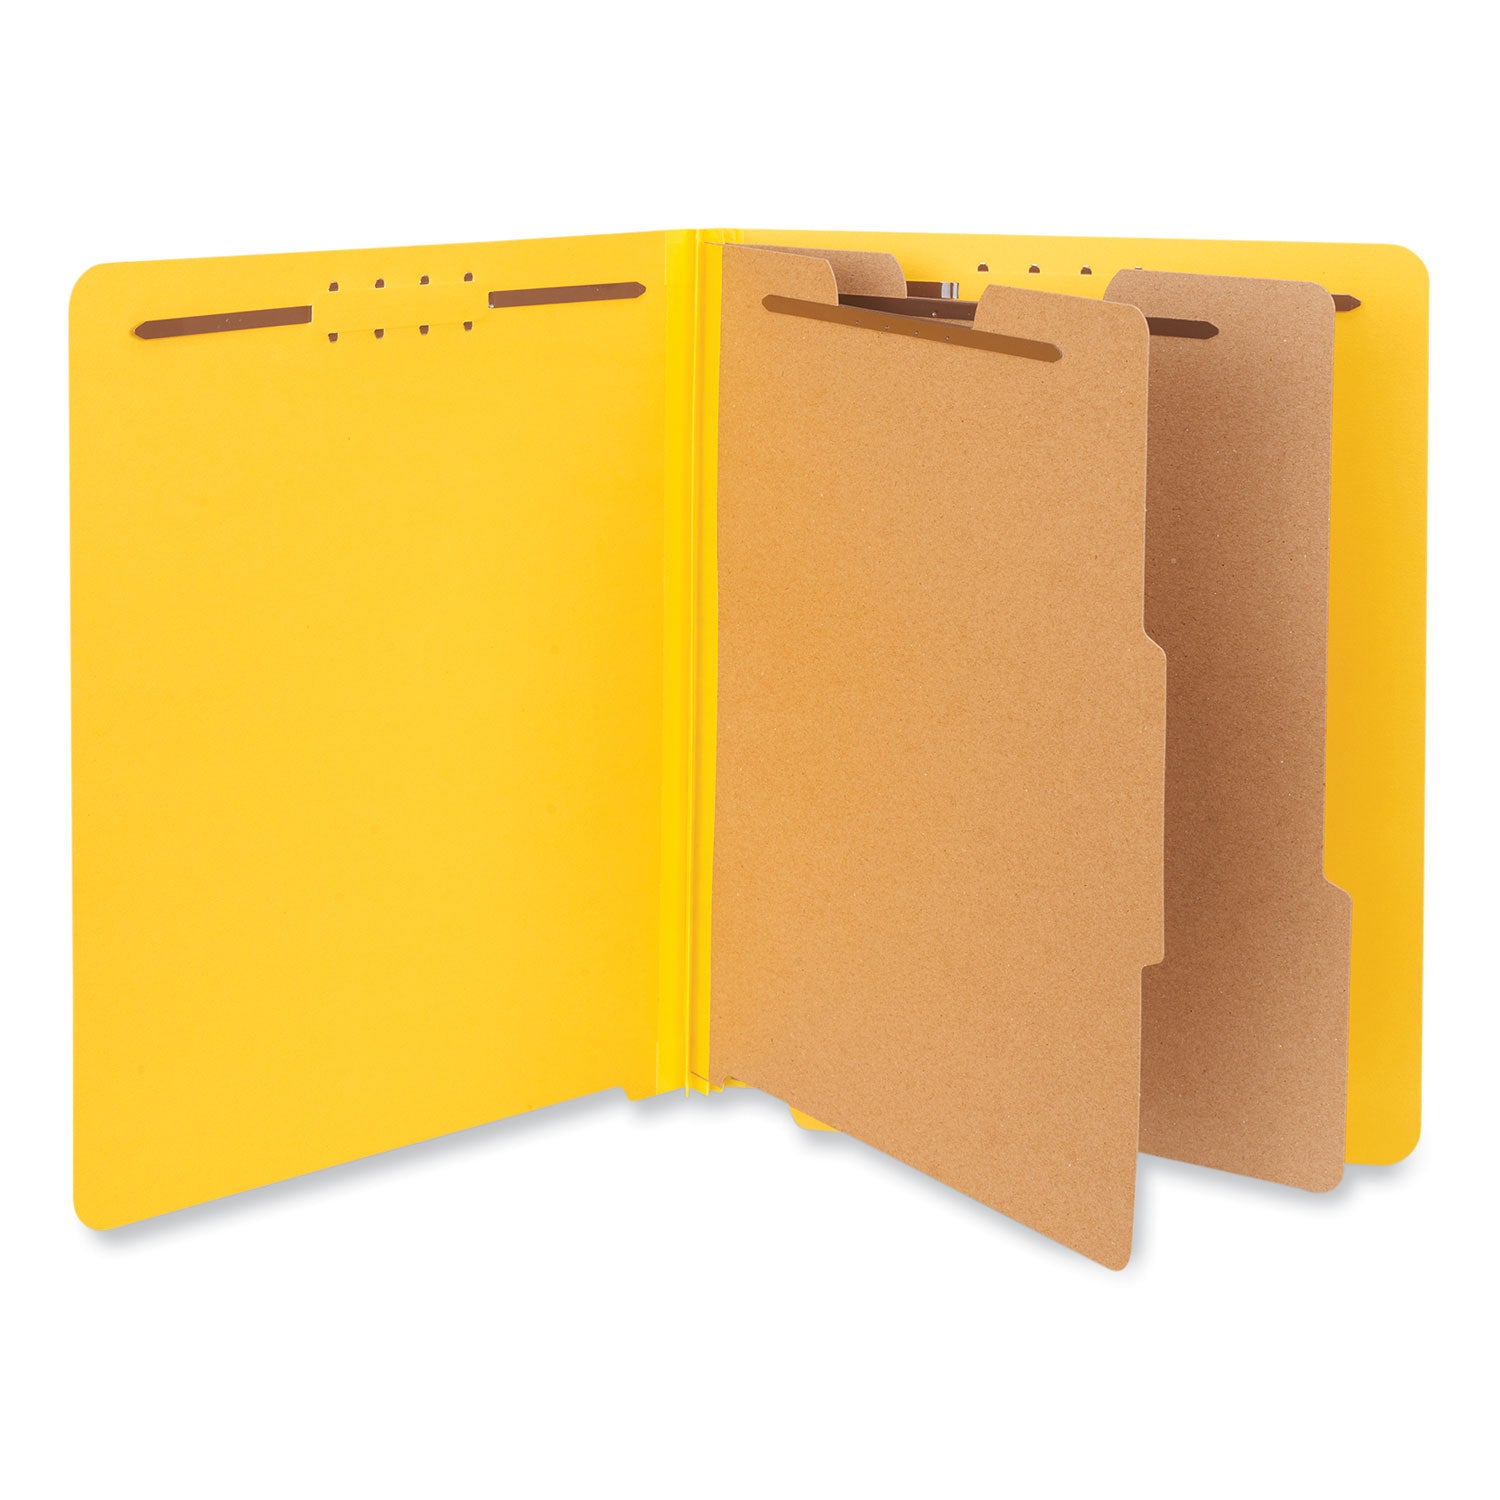 Deluxe Six-Section Pressboard End Tab Classification Folders, 2 Dividers, 6 Fasteners, Letter Size, Yellow, 10/Box - 